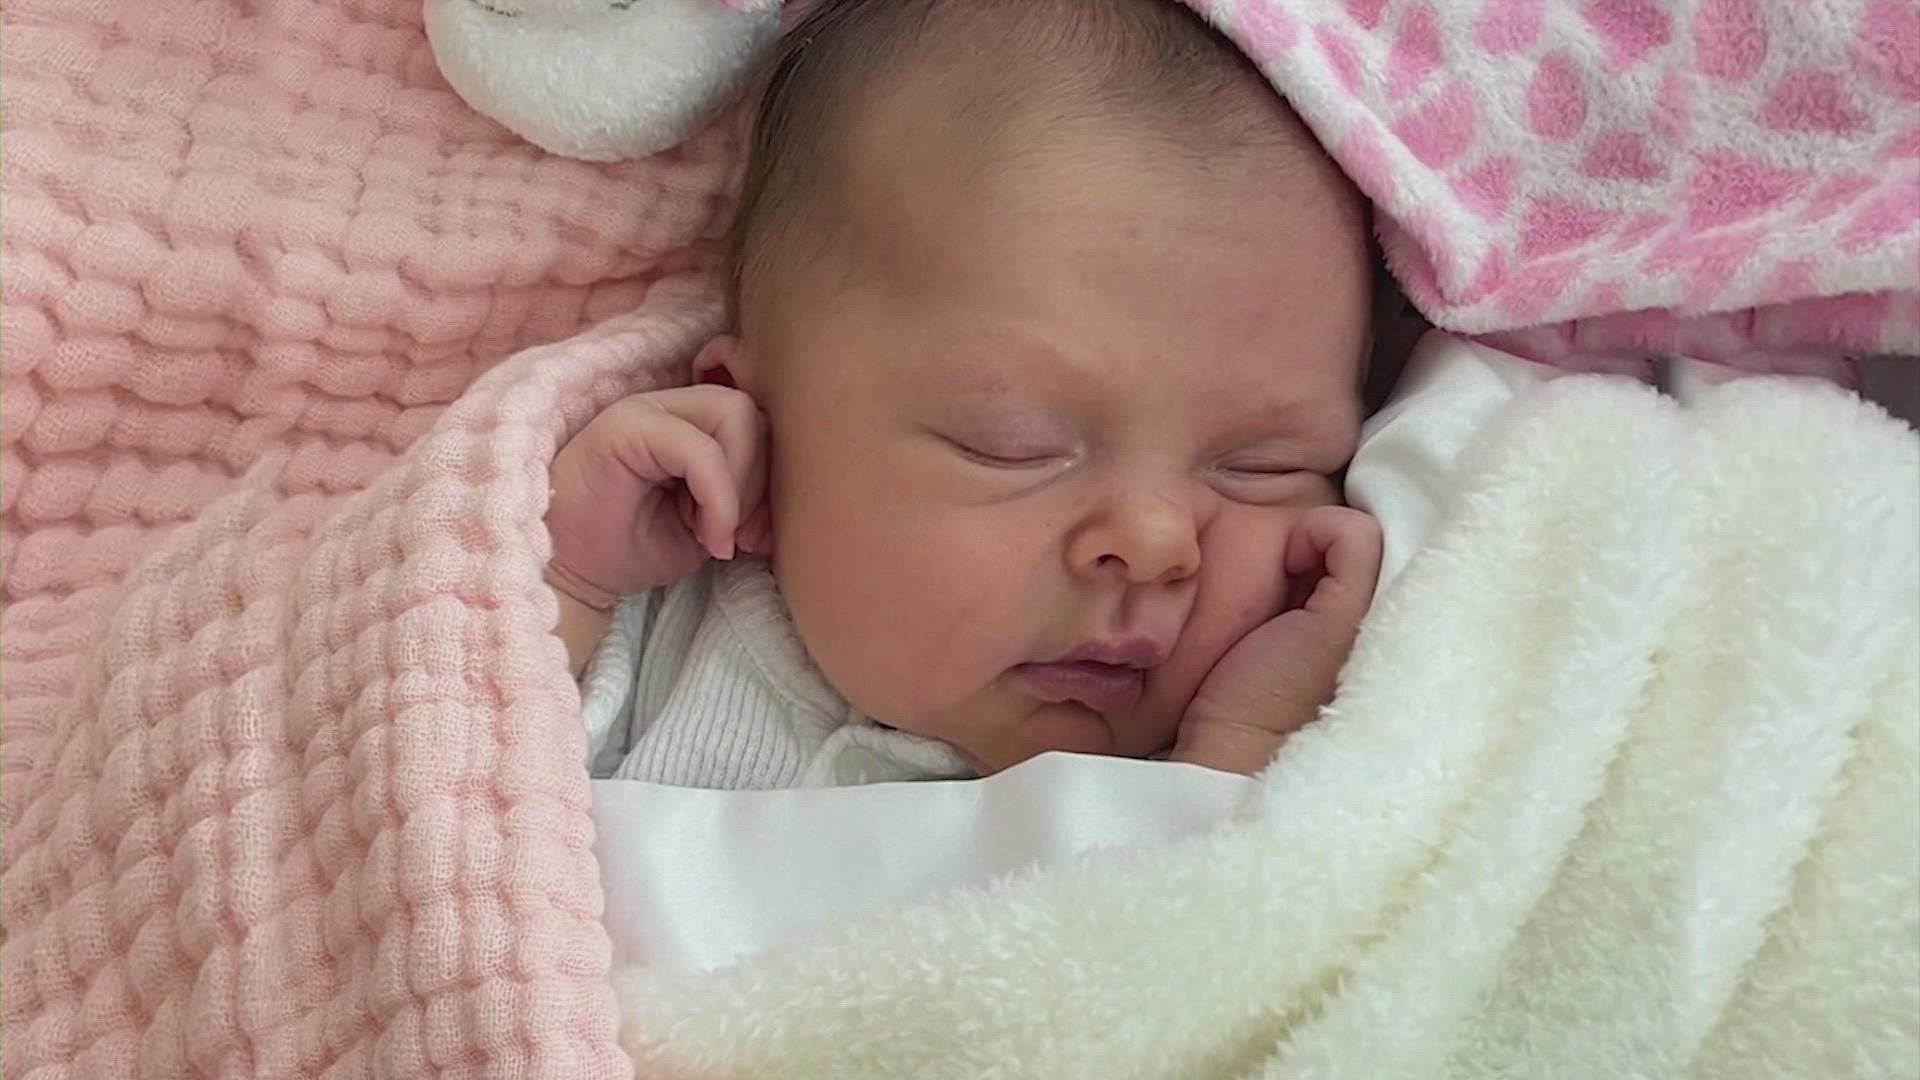 At only 7-weeks-old, Abigail Hope Cheng's life is nothing short of a miracle.